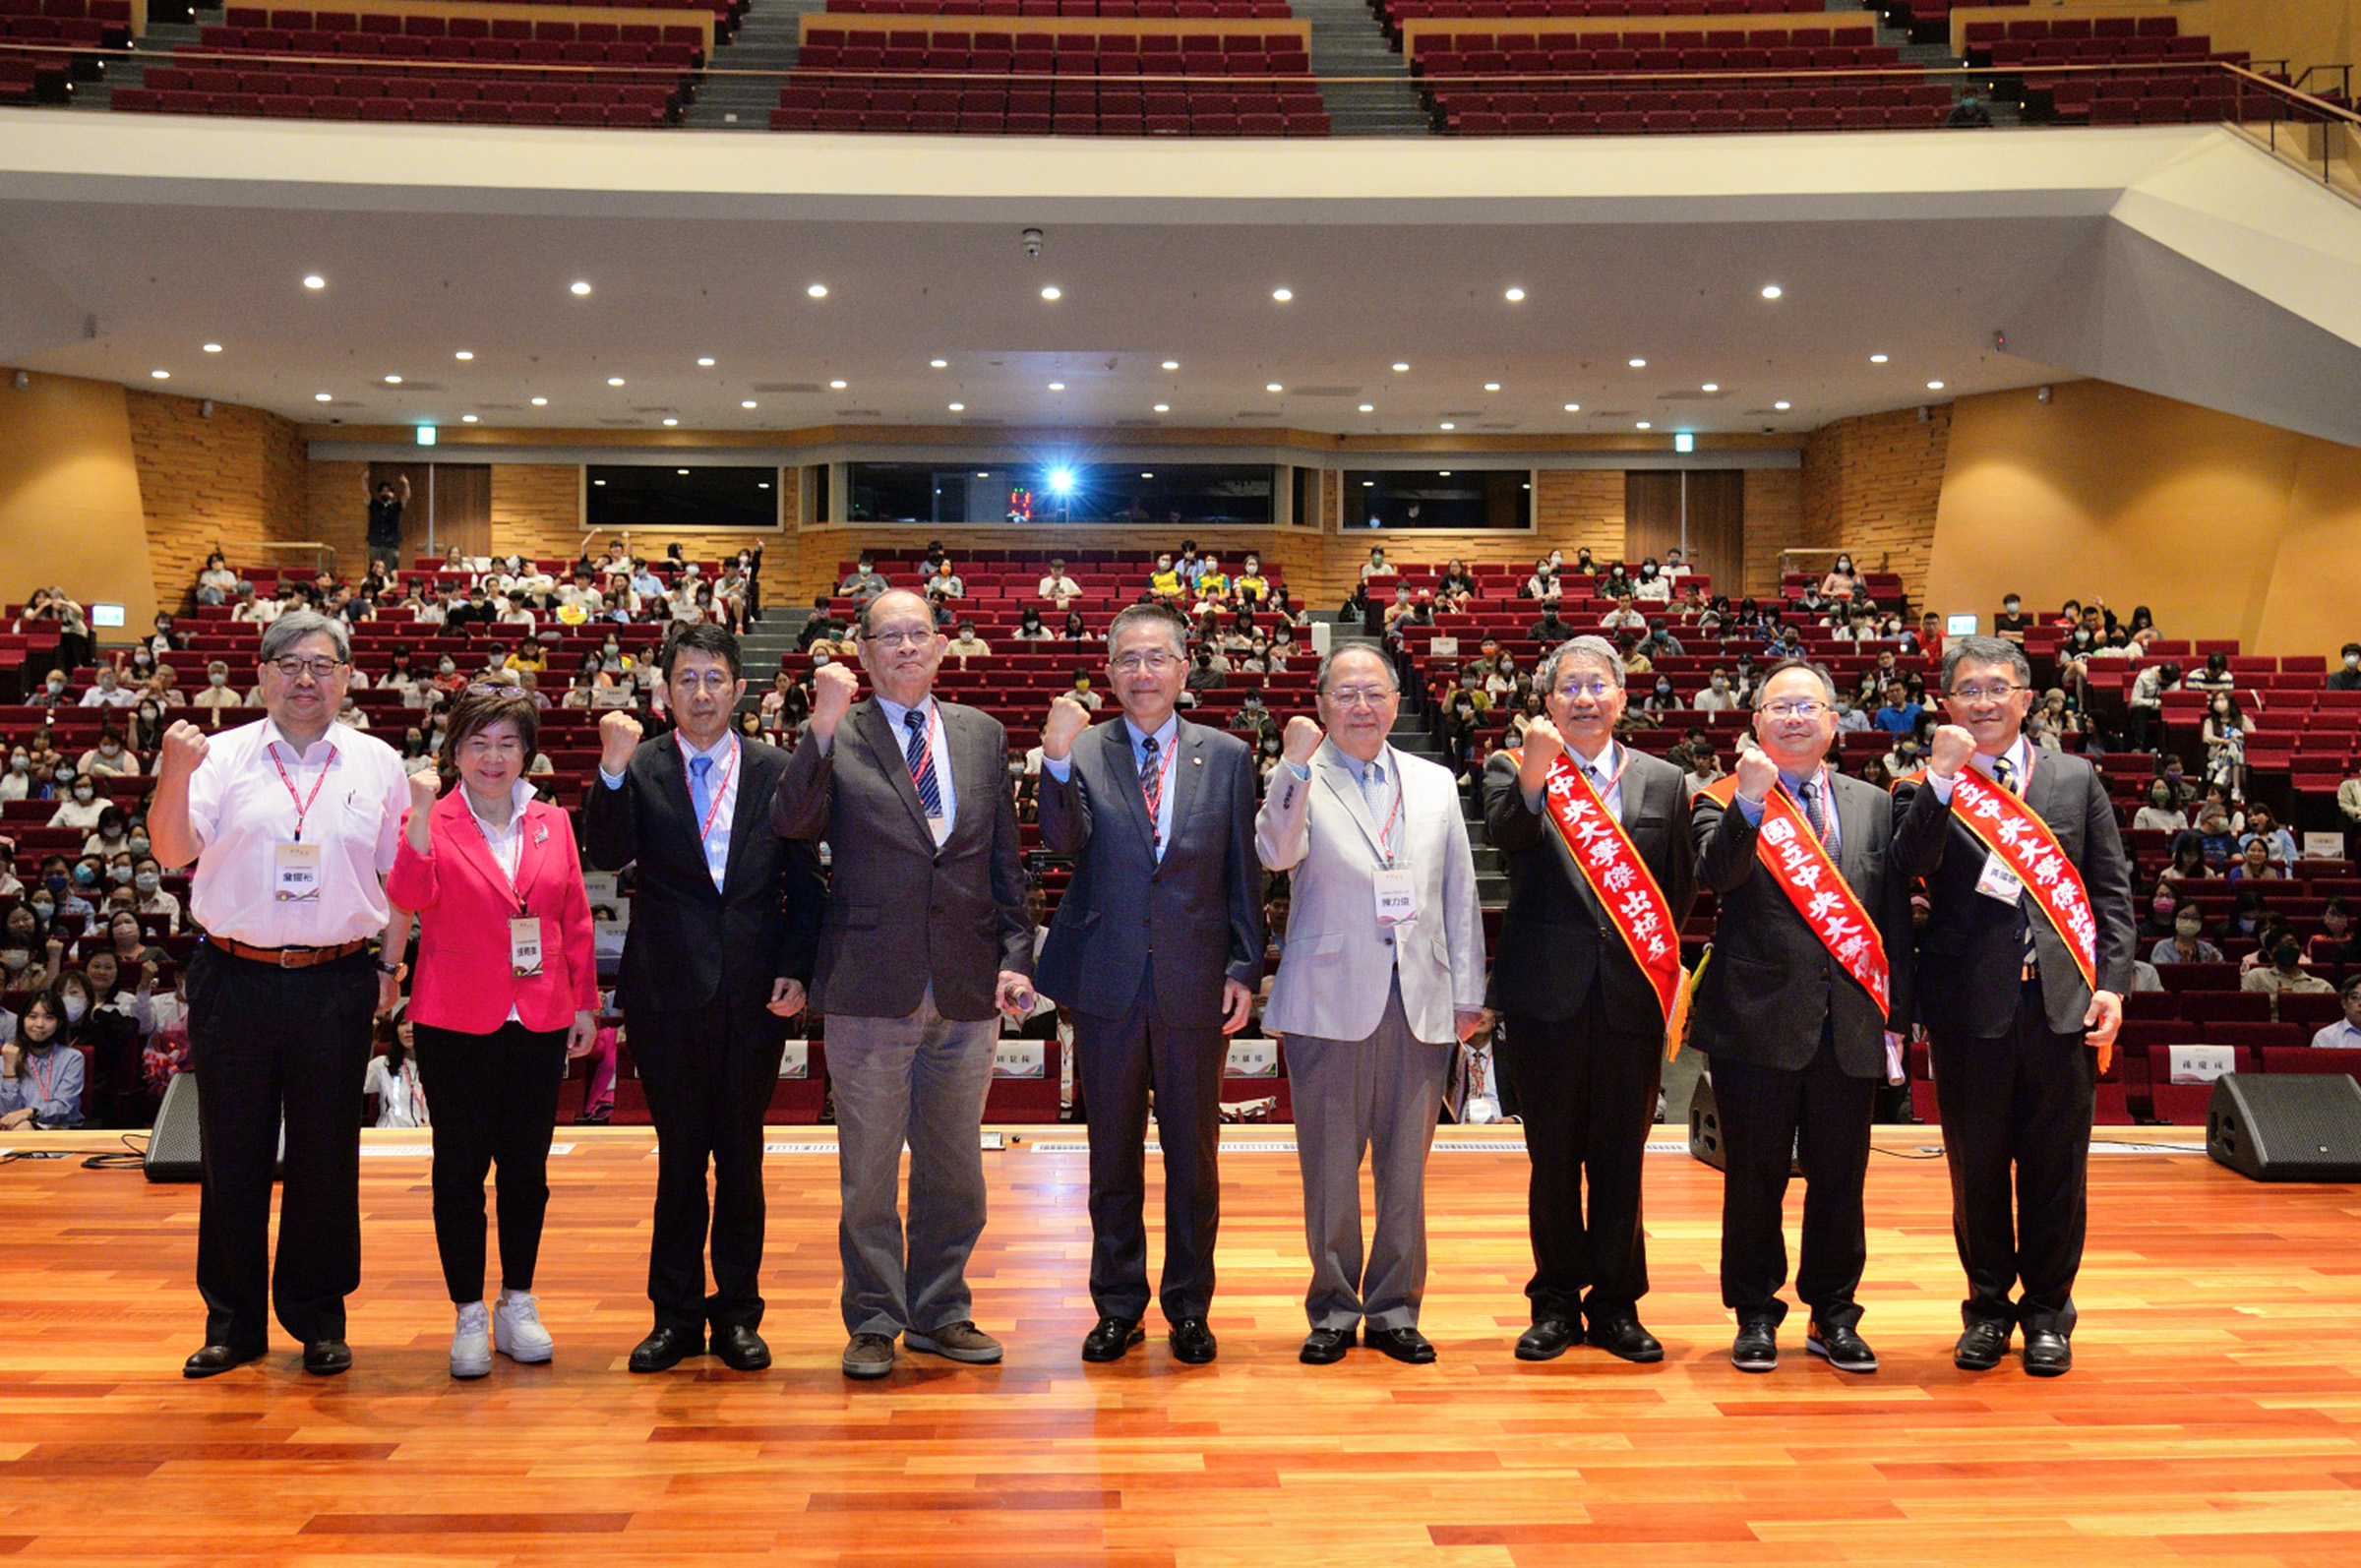 "A Fresh Start • Hope" - Celebrating the 108th Anniversary of National Central University